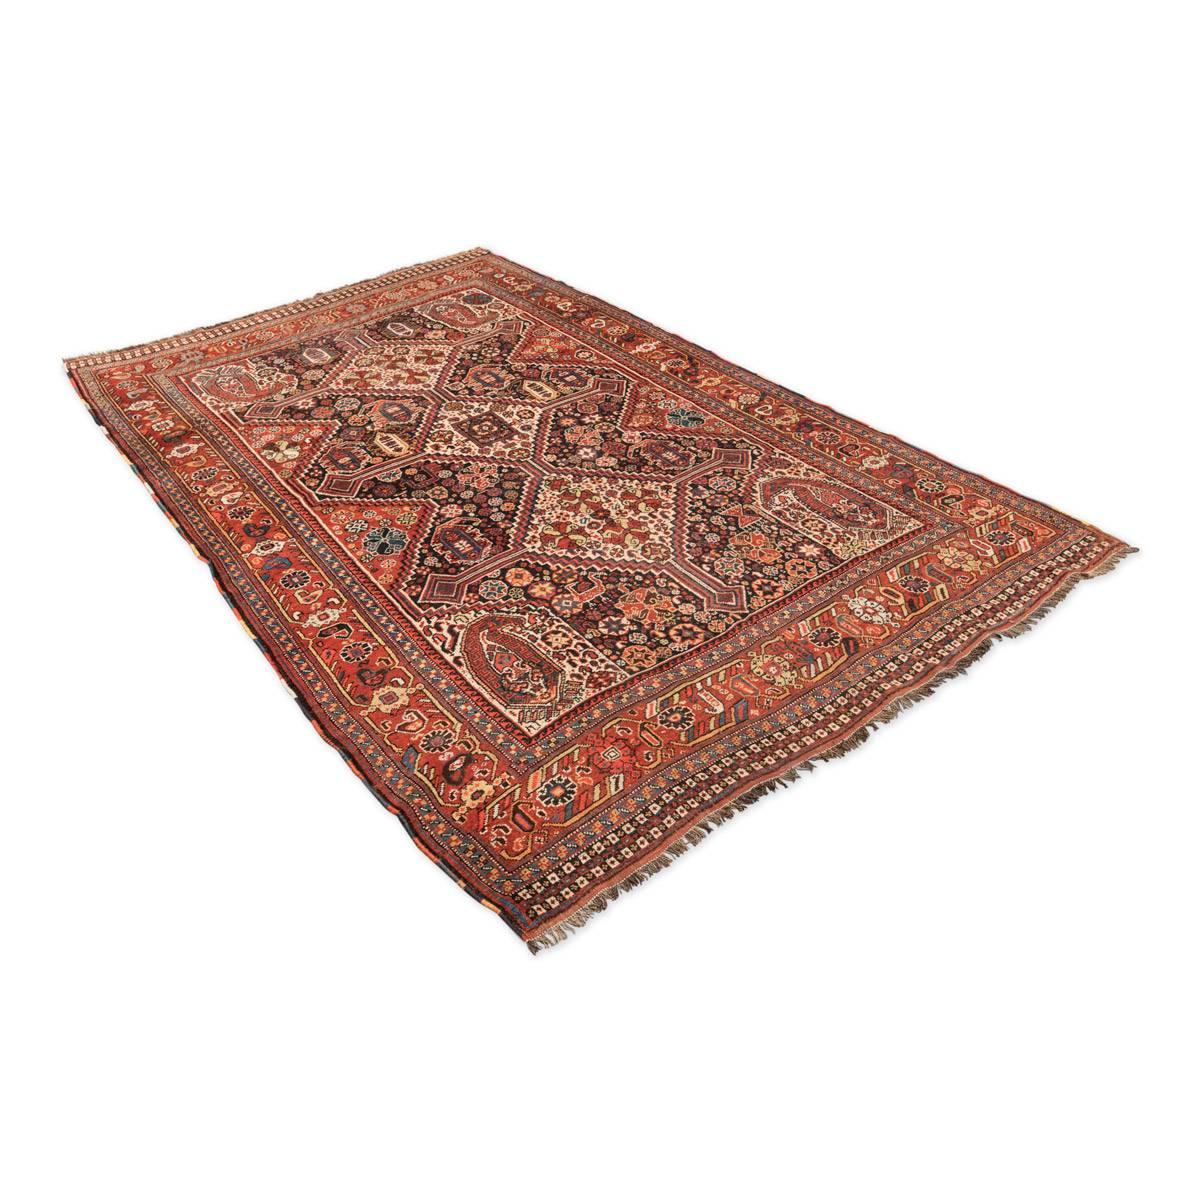 Persian rug of the kashgai nomadic tribe located on the outskirts of the city of Shiraz.
- This piece of ethnic origin is characterized by the flexibility of its fabric, typical of nomadic rugs.
- Typical central design with three diamonds which are